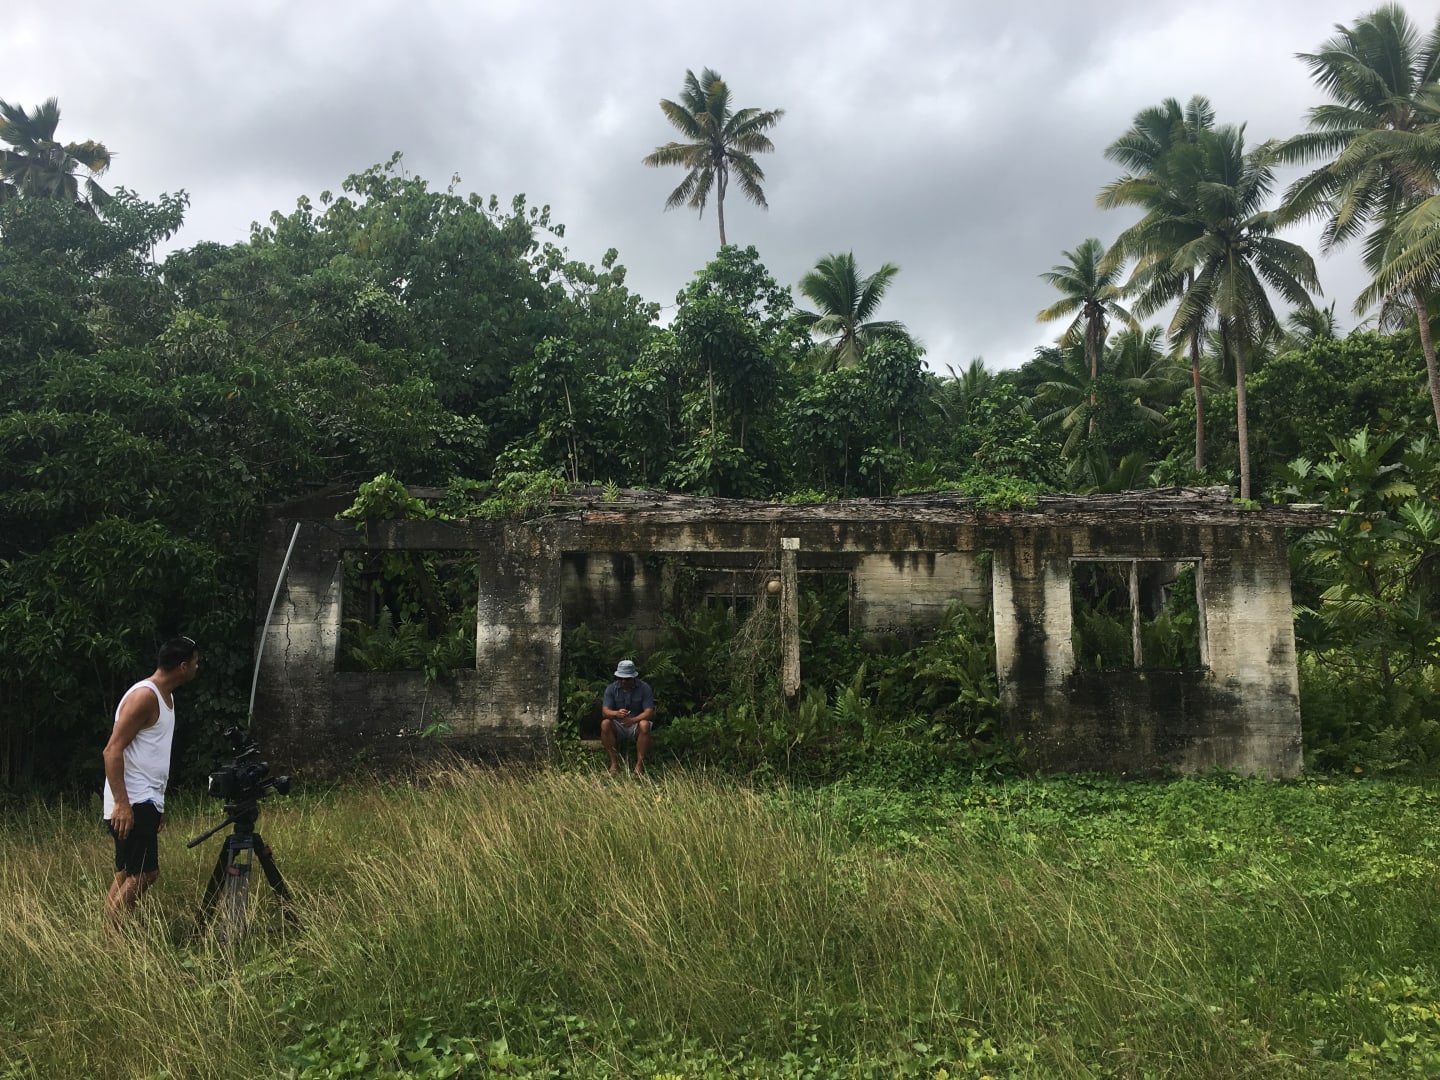 DOP, Jack Tarrant, setting up a shot with presenter, Shimpal Lelisi, in an overgrown derelict Niue building